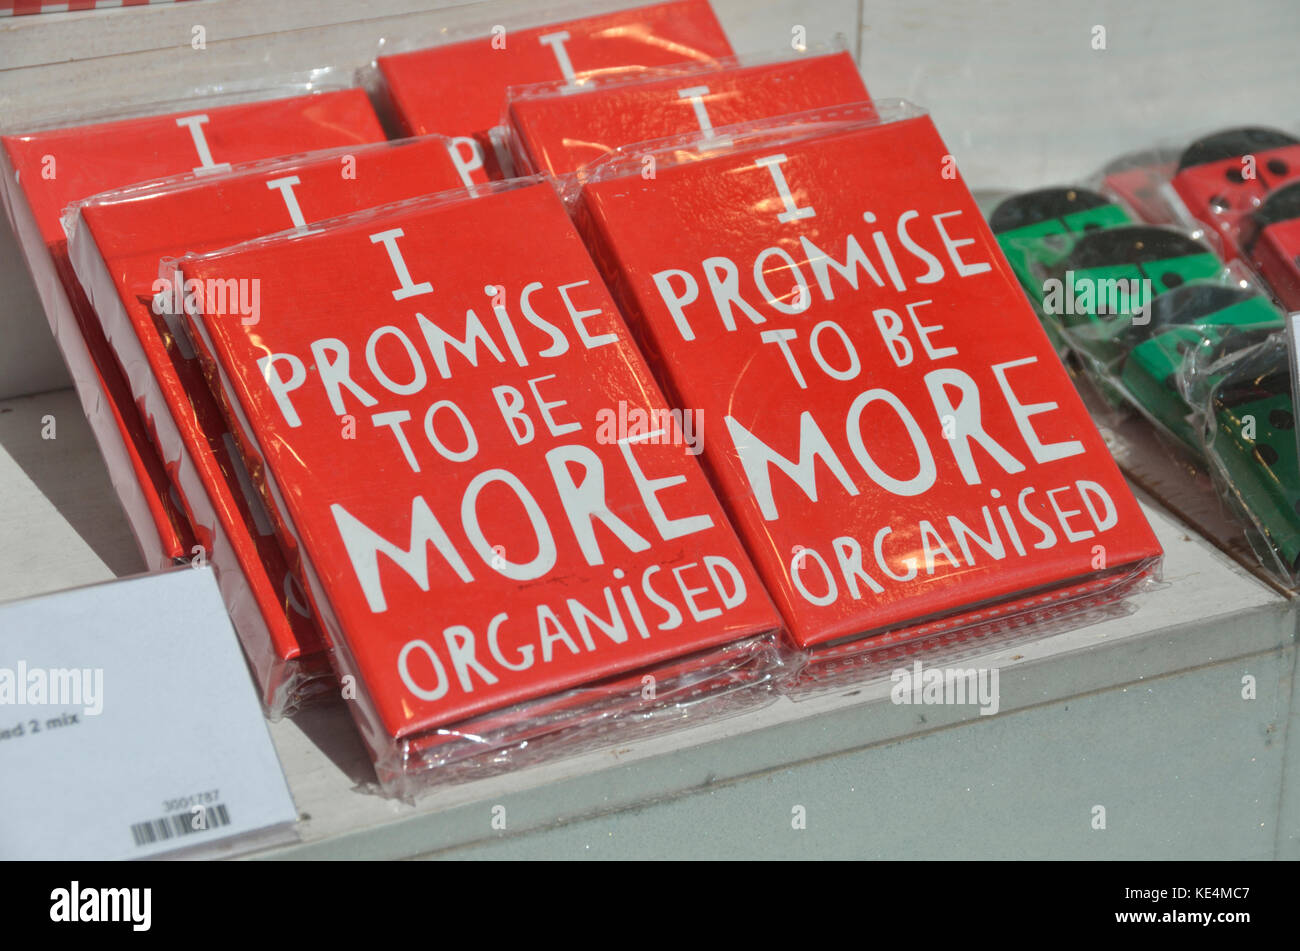 Red notebooks displaying the slogan ’I promise to be more organised’. Stock Photo